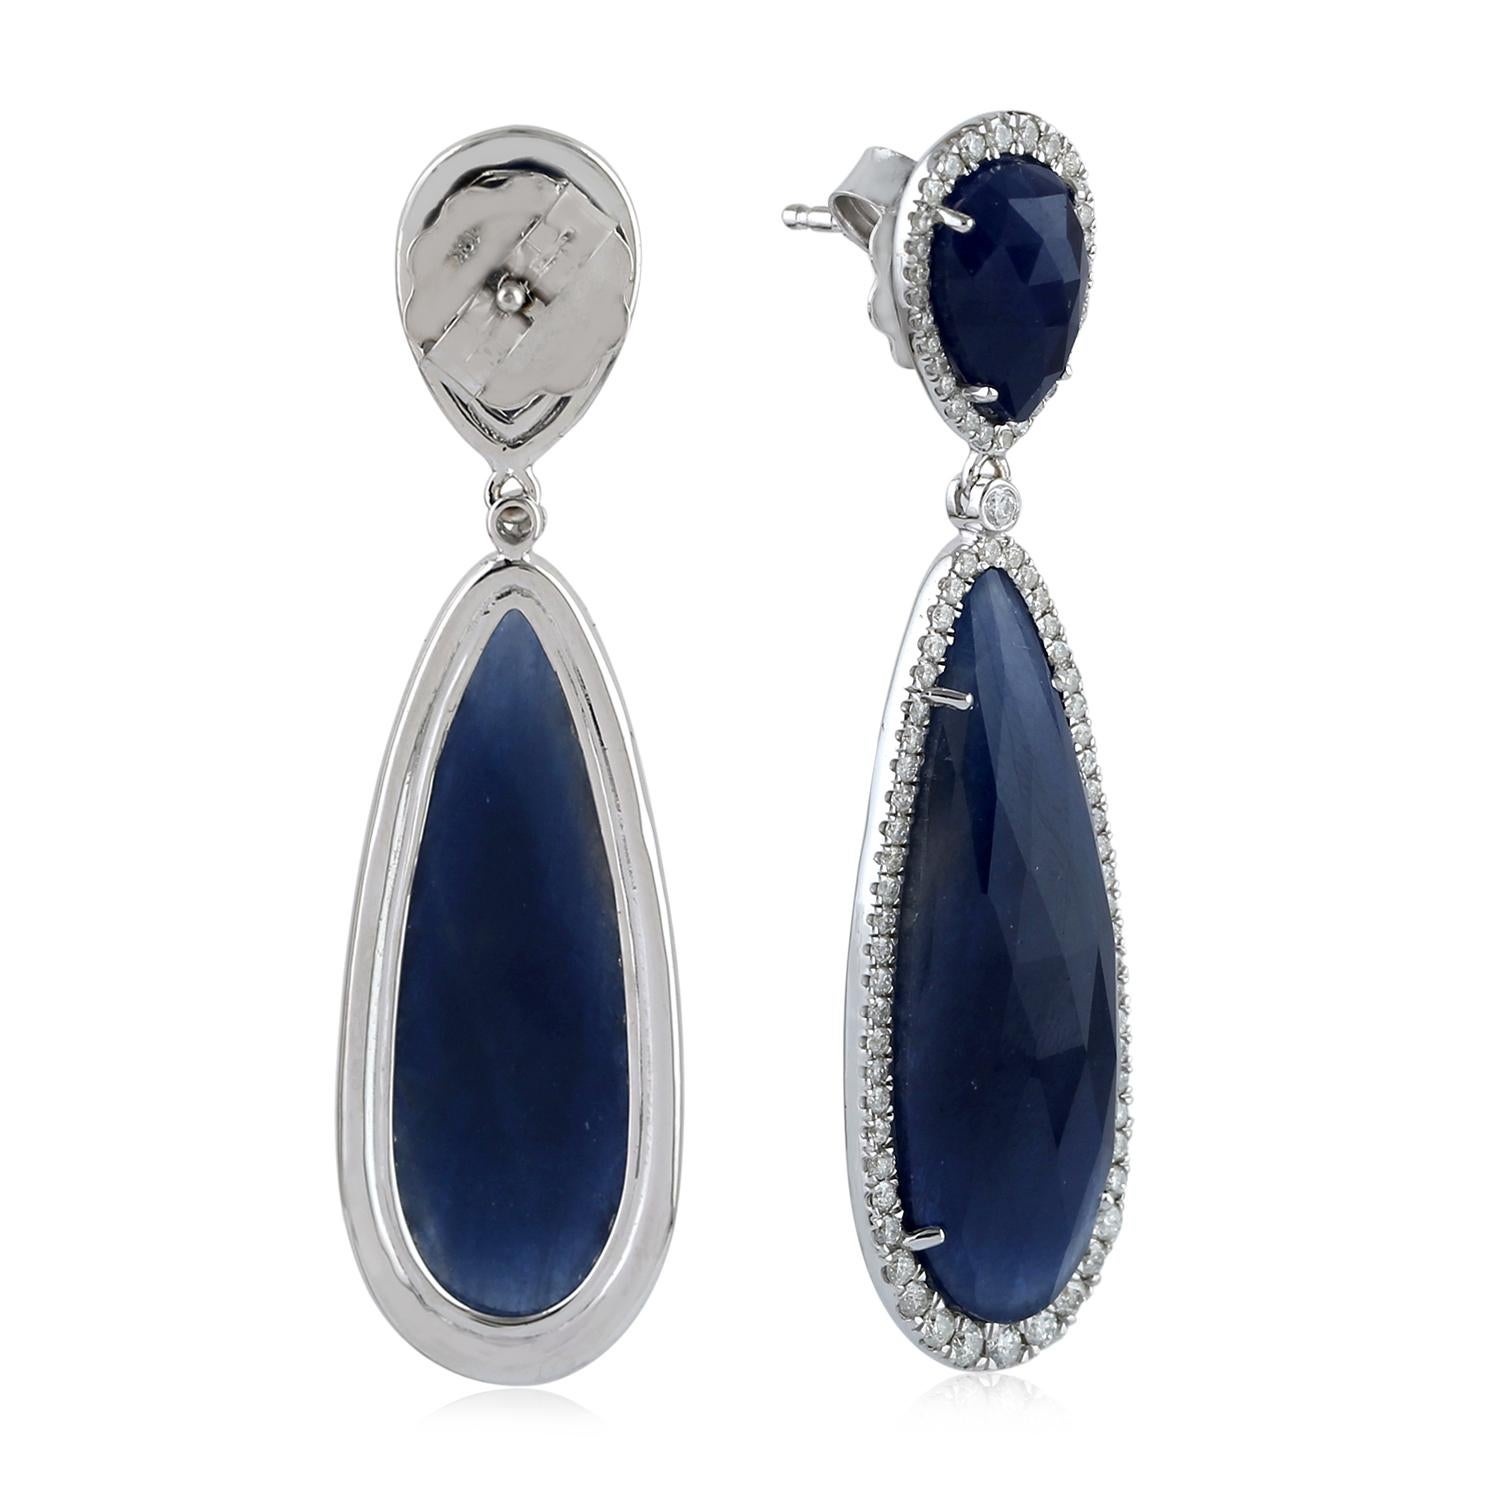 Two-Tier Pear and round shape Slice Sapphire and Diamond Dangle Drop Earring in 18k White Gold, perfect for any occasion.

Closure: Push Post

18KT Gold:8.046gms
Diamond:1.23cts
Sapphire:29.39cts
